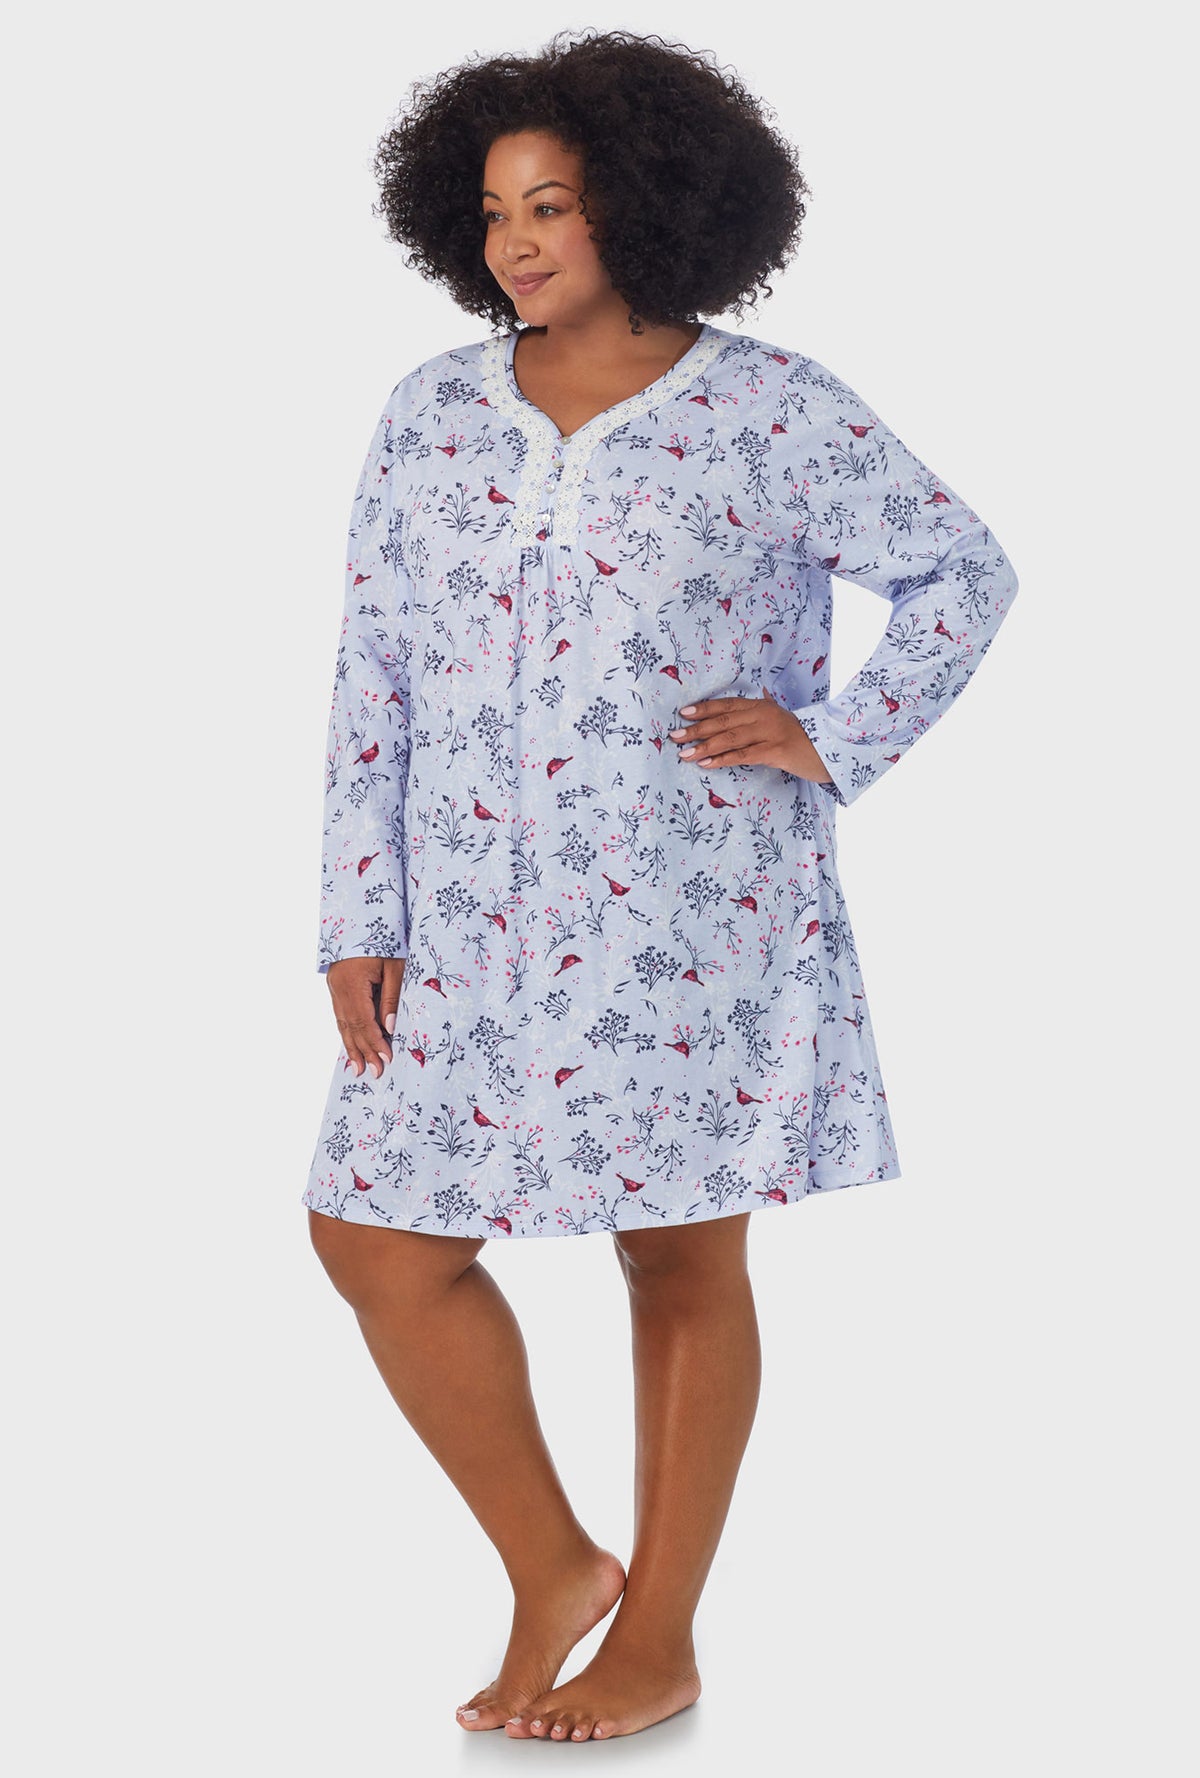 A lady wearing white Long Sleeve plus size Nightgown with Winter Blue print